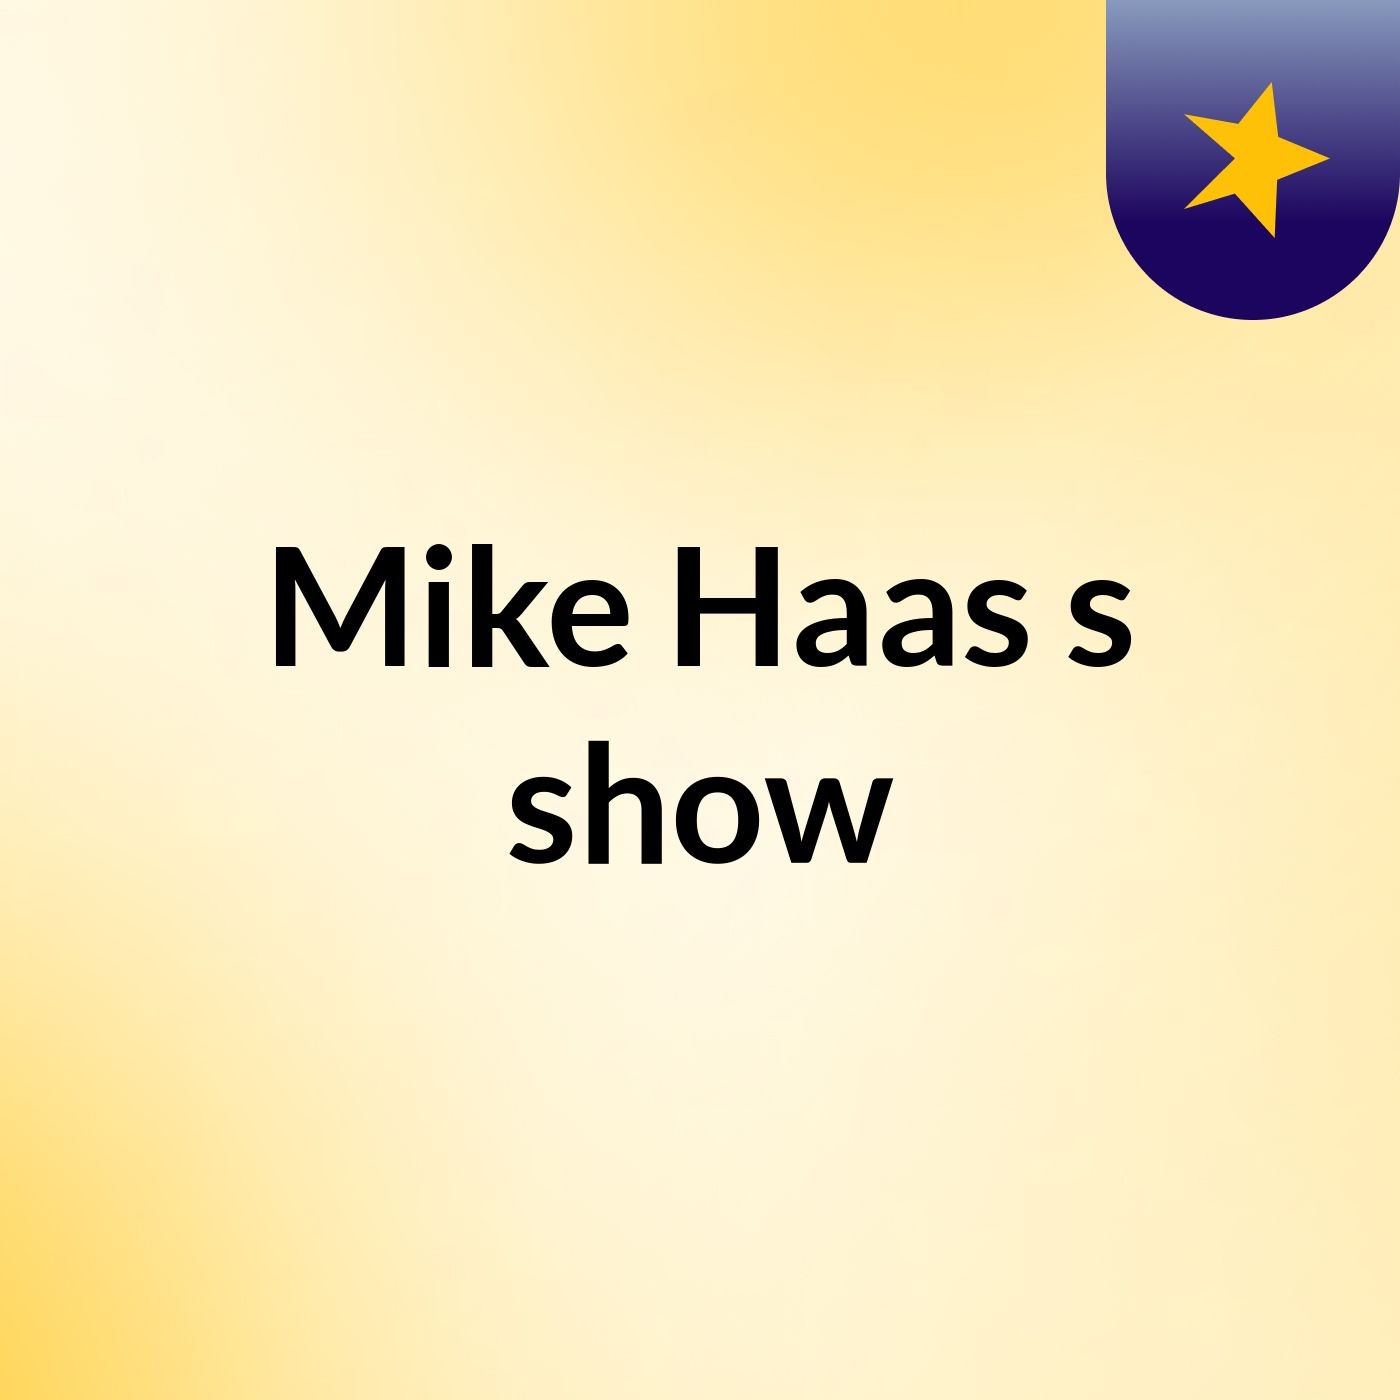 Mike Haas's show